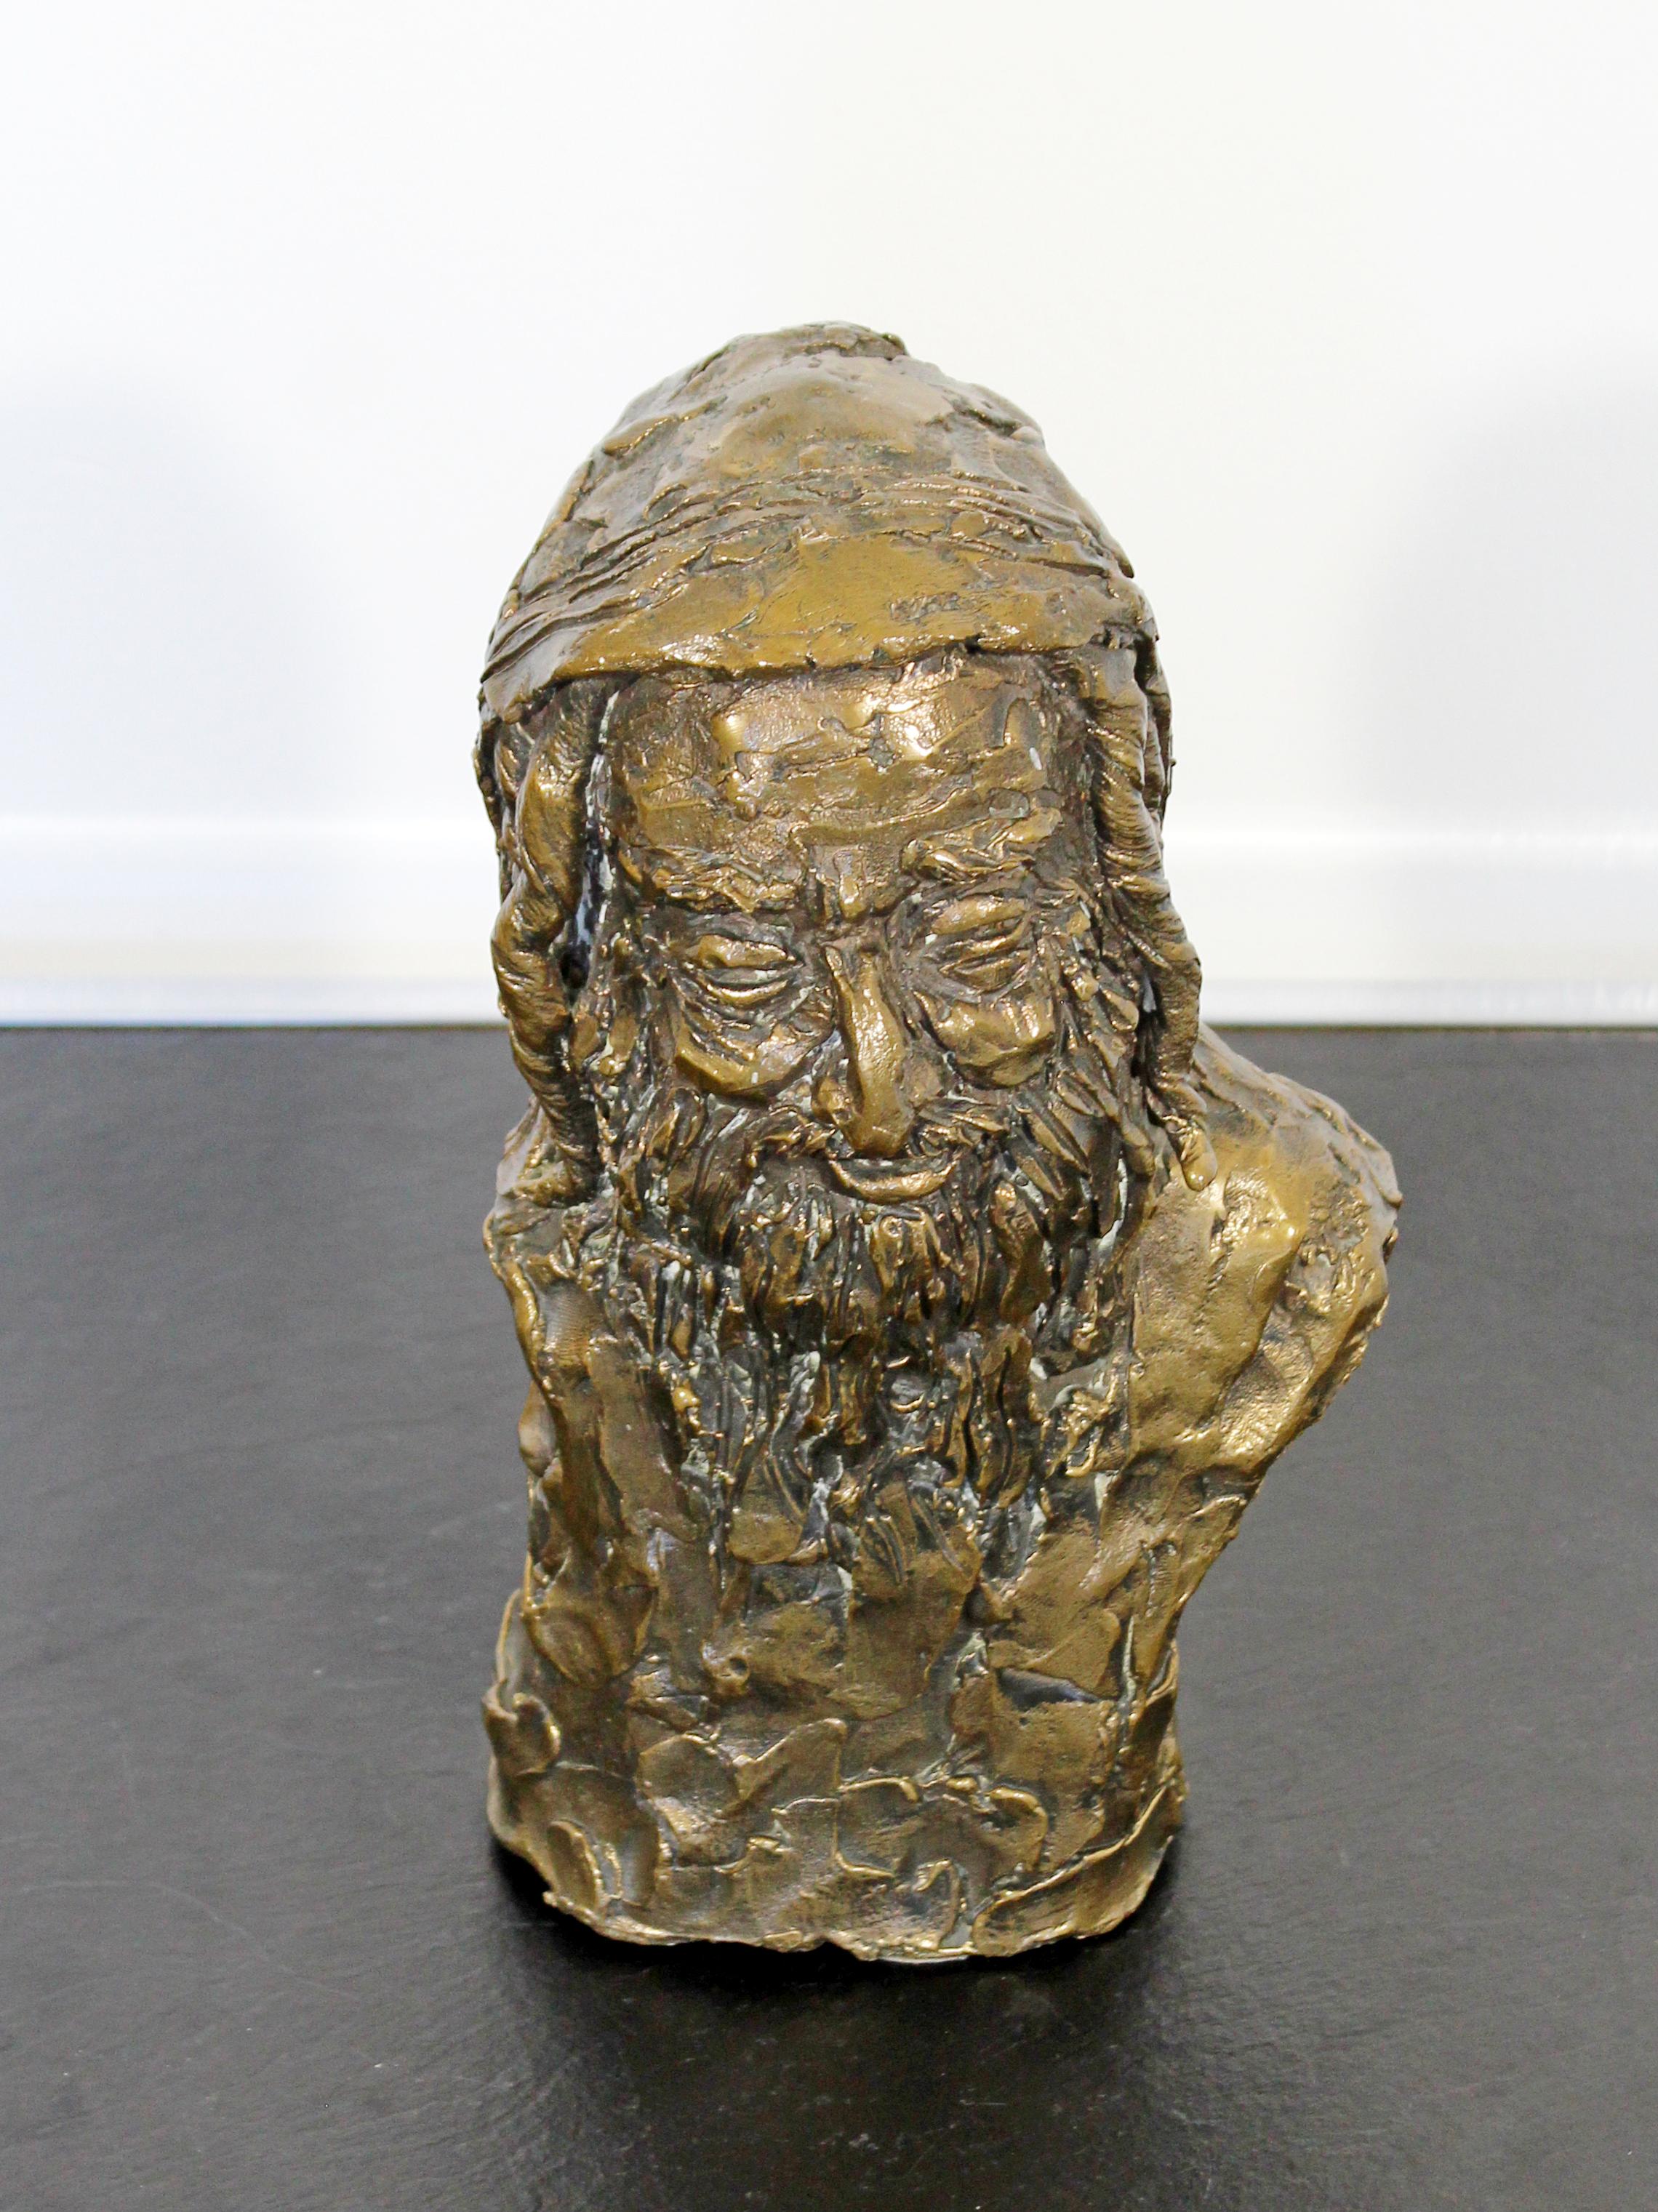 For your consideration is a stunning, heavy bronze table sculpture, depicting a Jewish scholar or Rabbi, signed M. In excellent condition. The dimensions are 7